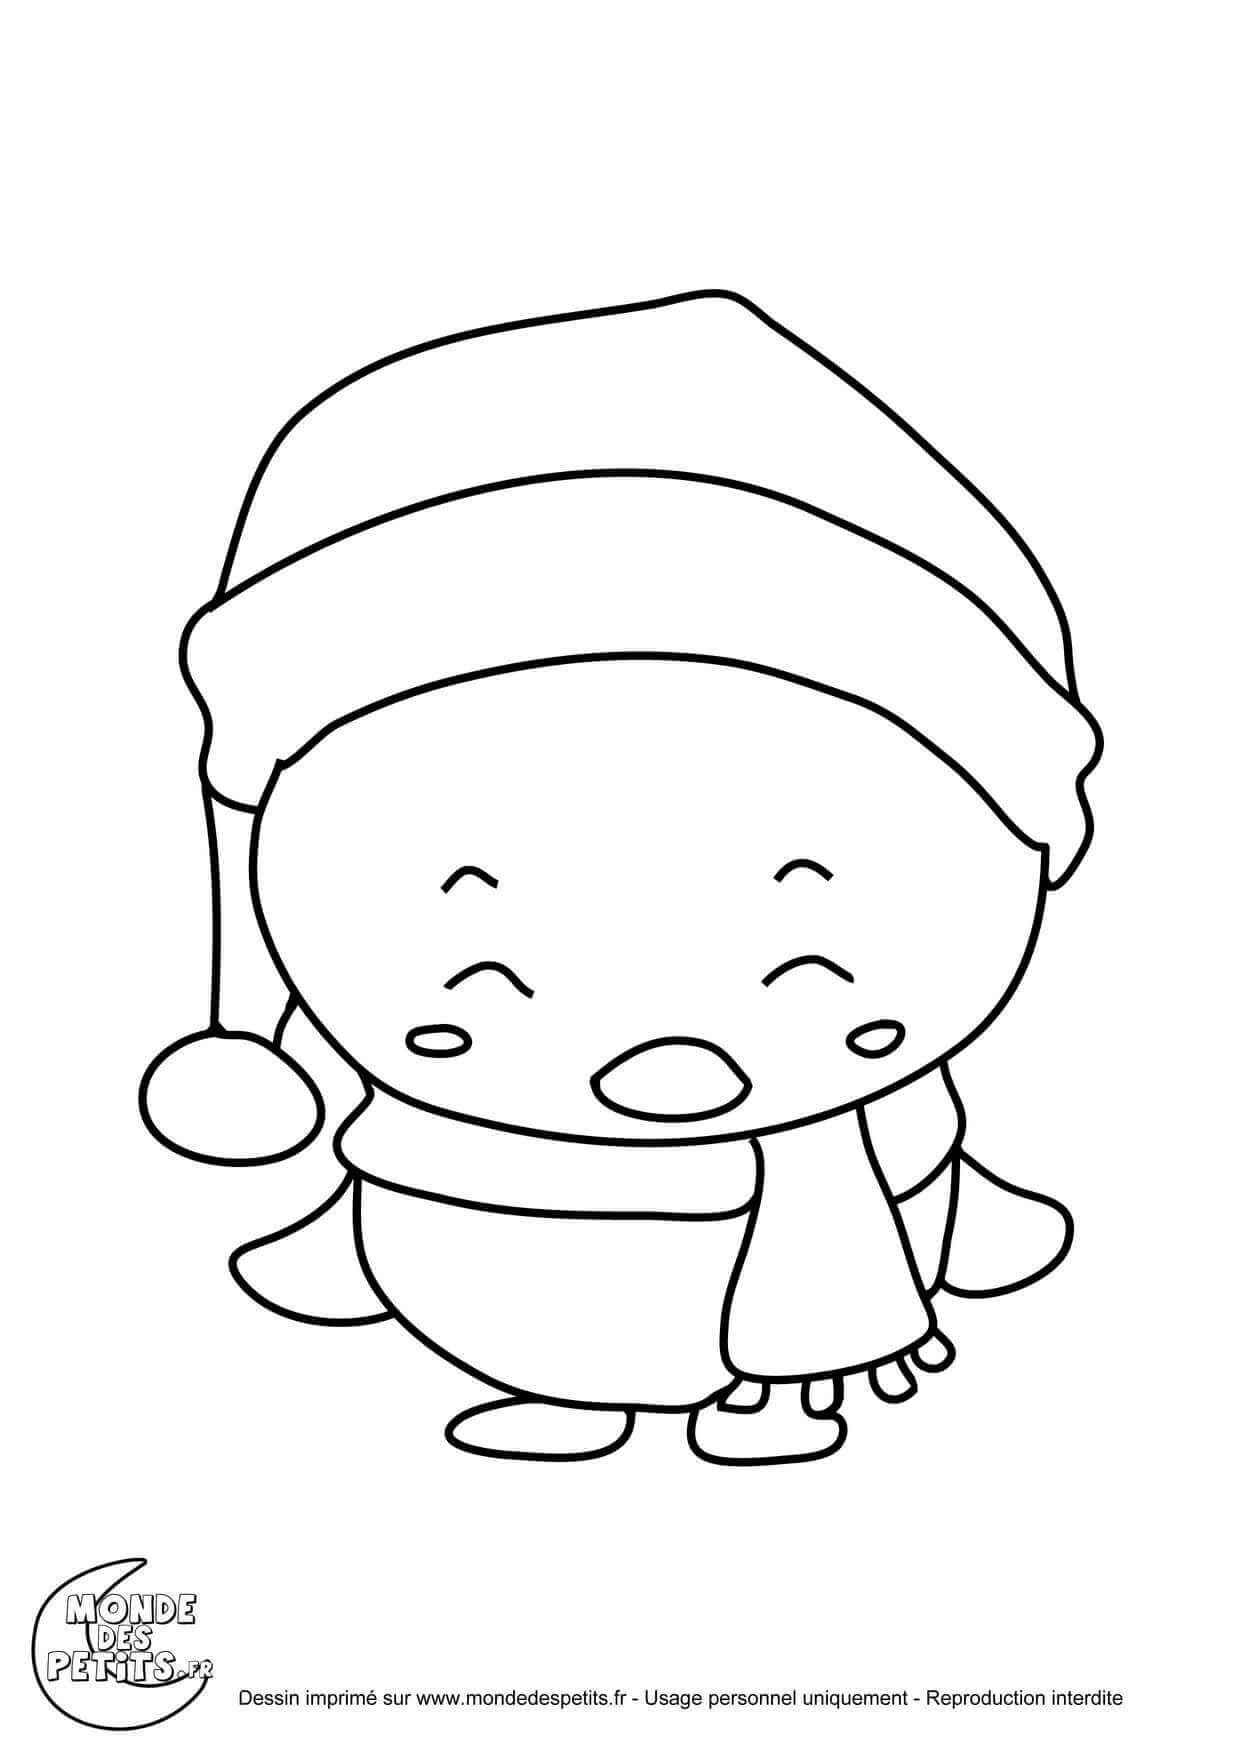 Titounis Noel Poussin coloring page